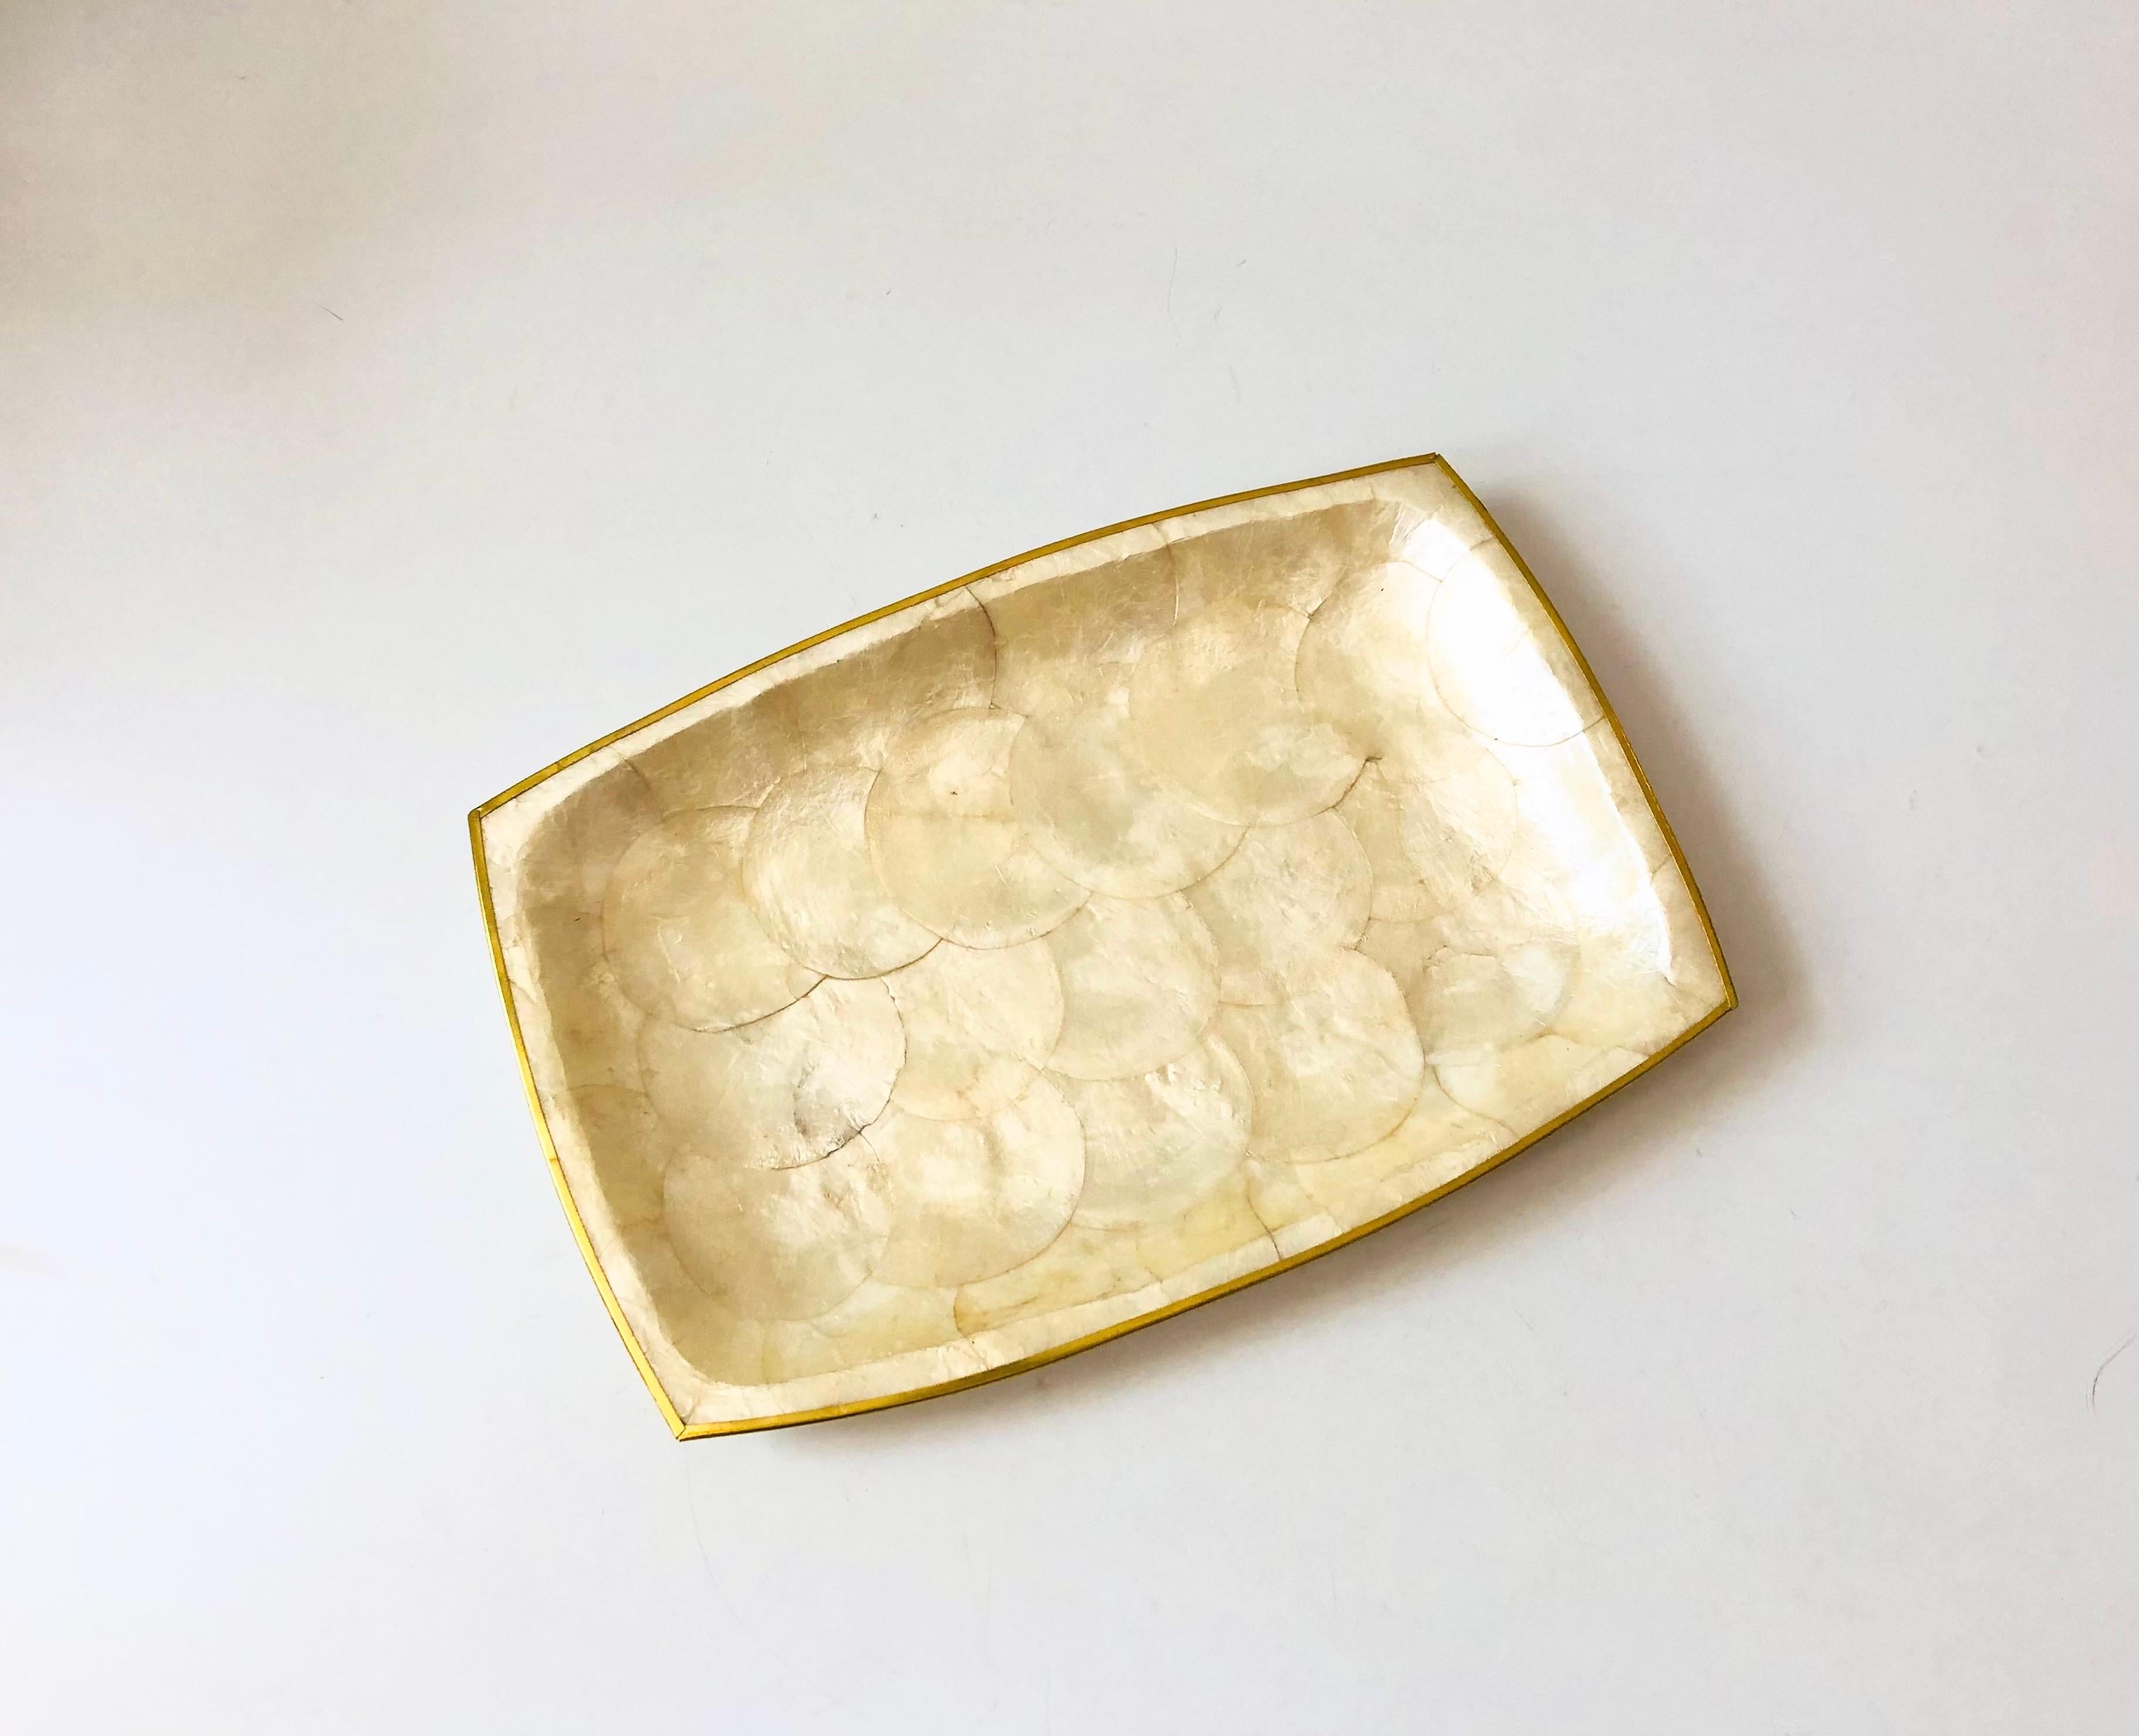 A vintage rectangular capiz shell tray. Edges are trimmed in brass. Lovely variation to the natural semi iridescent capiz shell.

